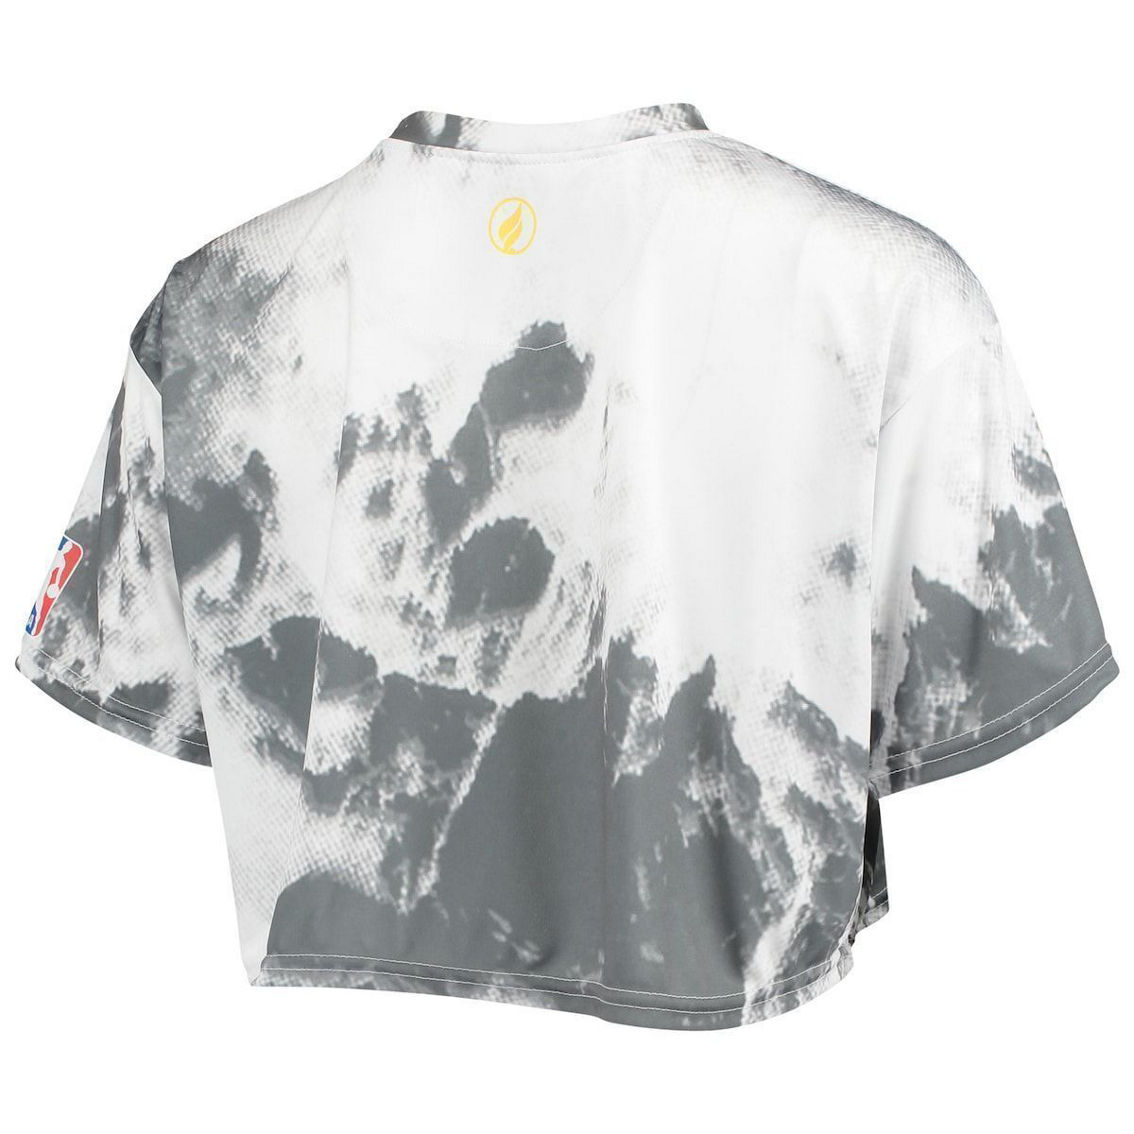 NBA Exclusive Collection Women's White/Black Los Angeles Lakers Tie-Dye Crop Top & Shorts Set - Image 4 of 4